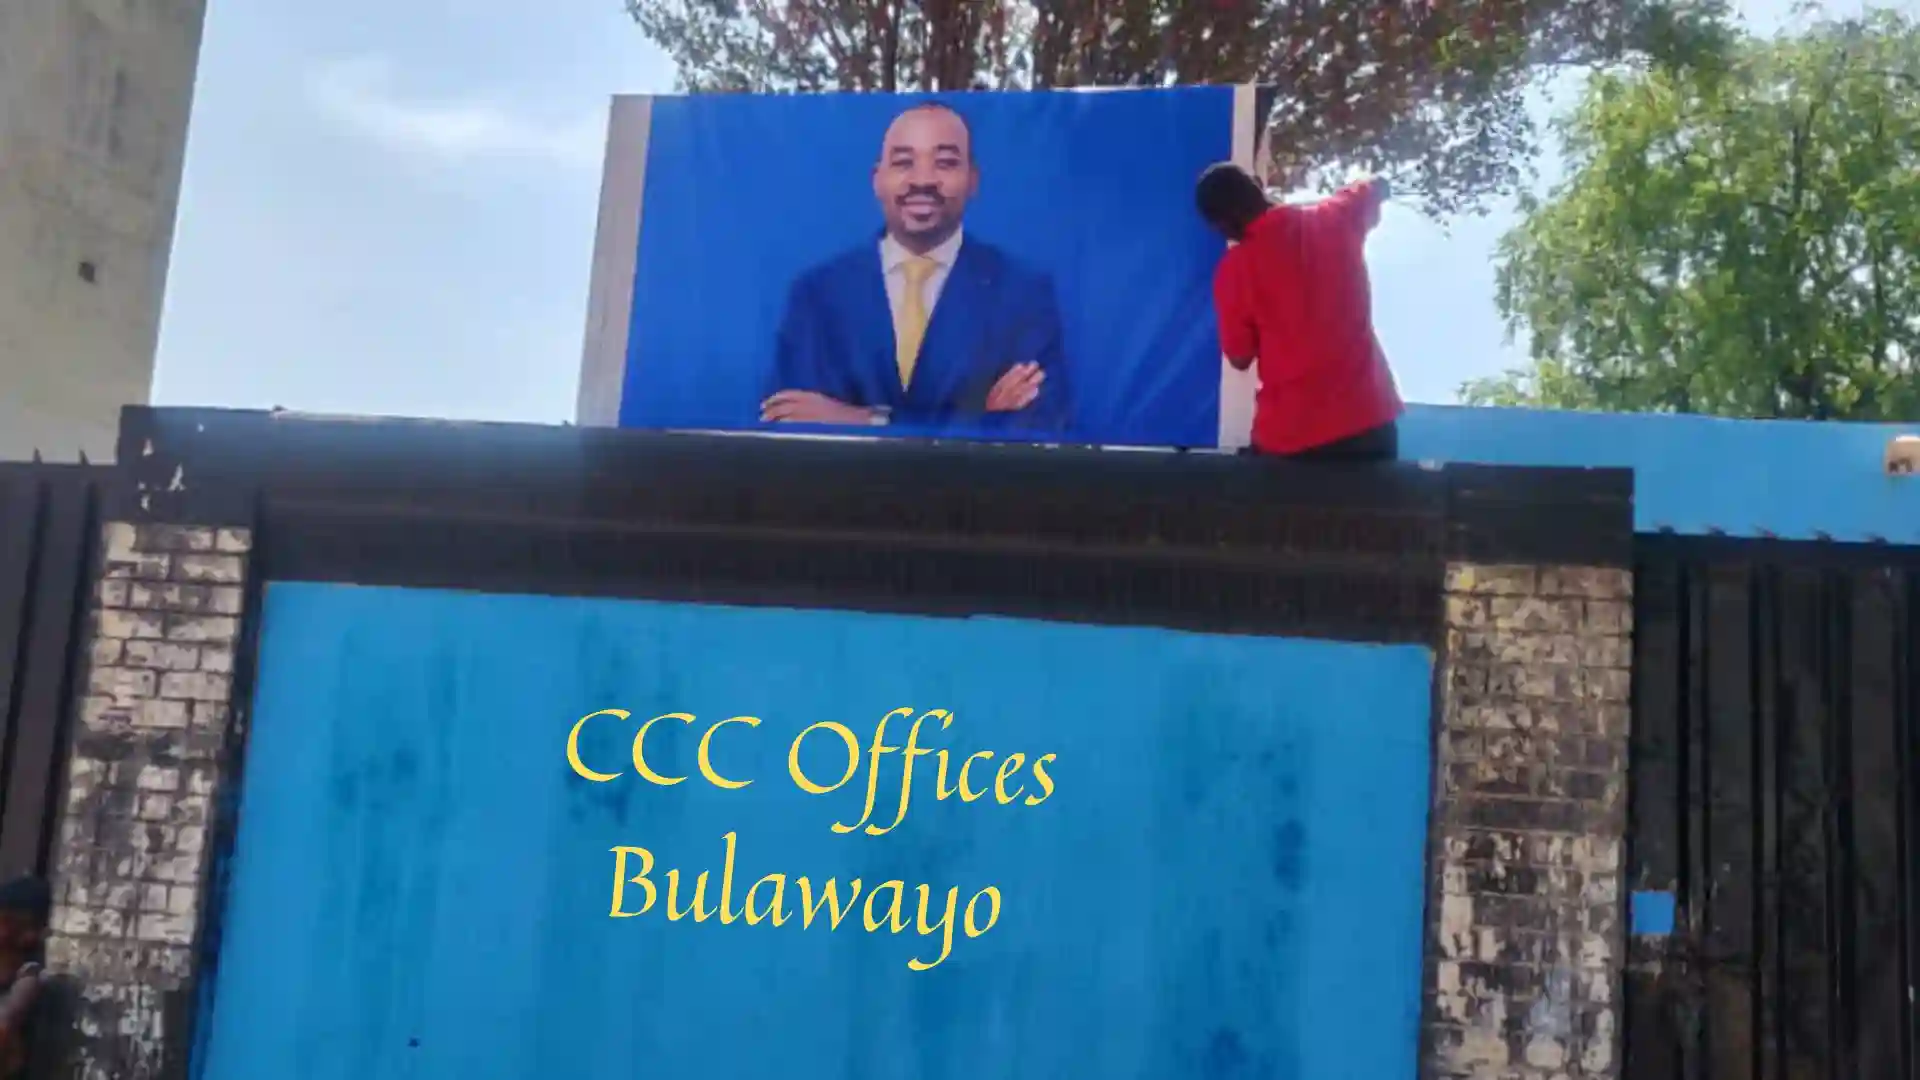 PICTURES: CCC Offices In Bulawayo Painted Blue